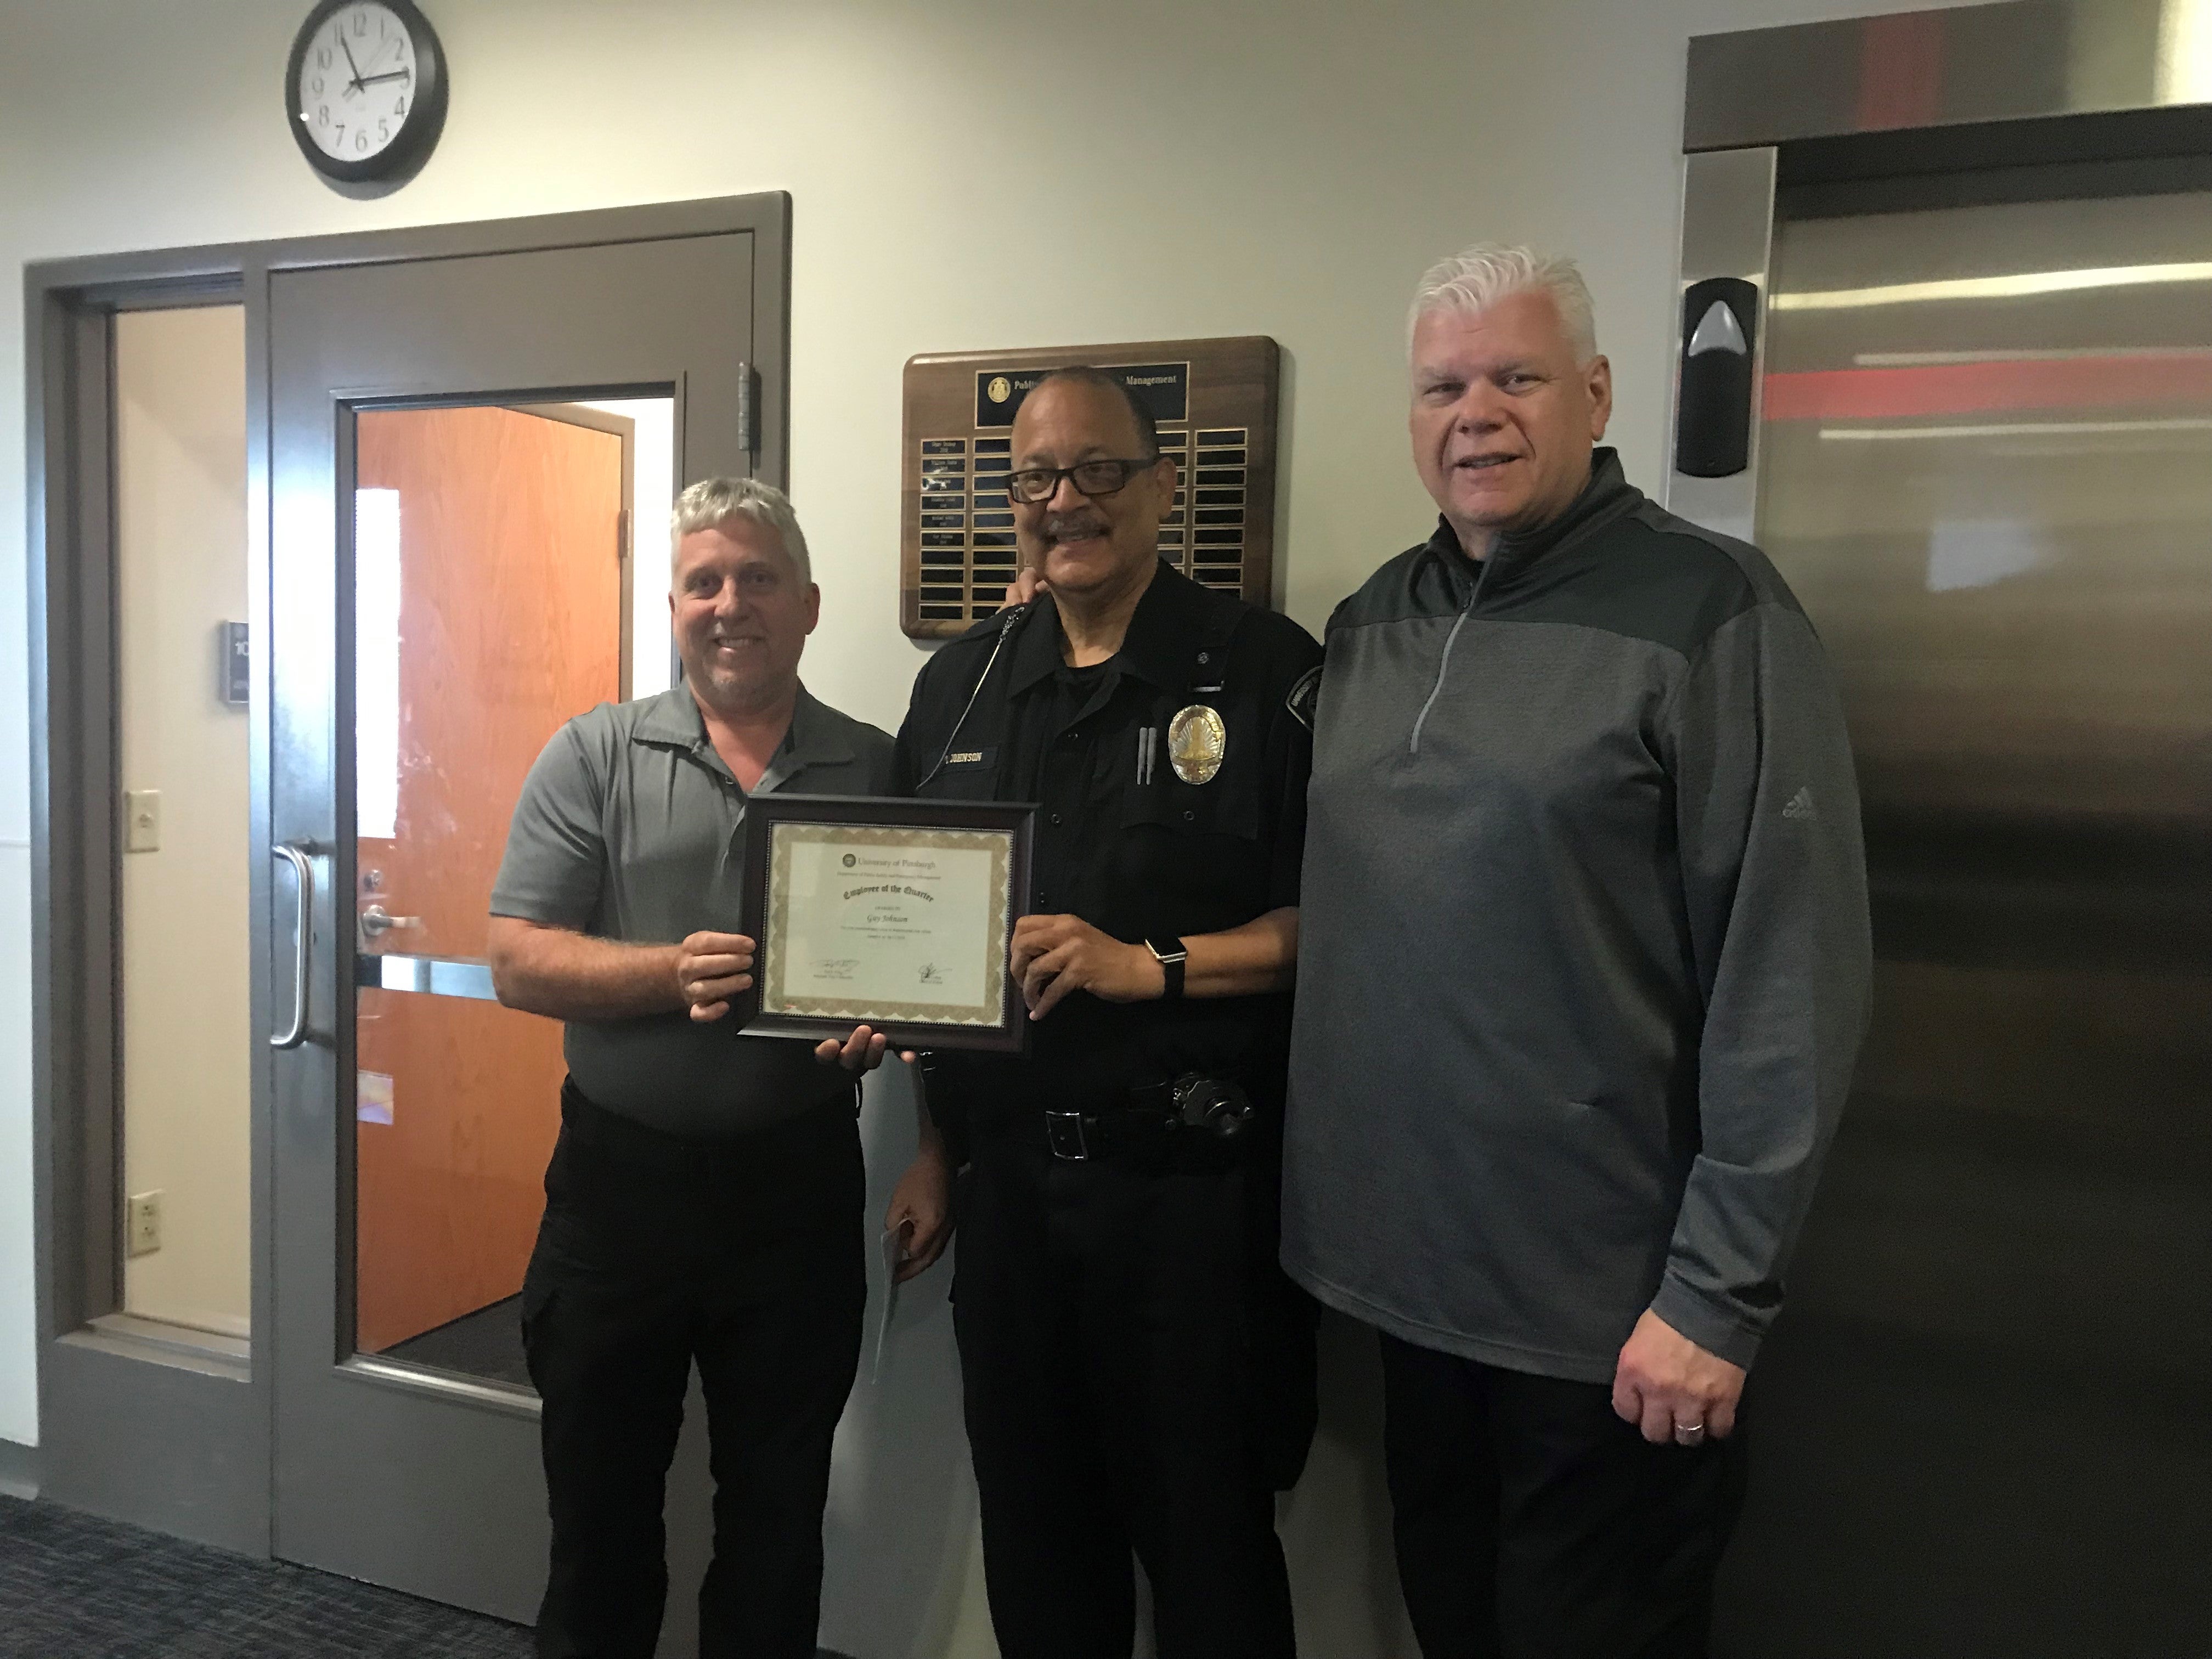 AVC Ted Fritz, Officer Guy Johnson, and Chief Loftus